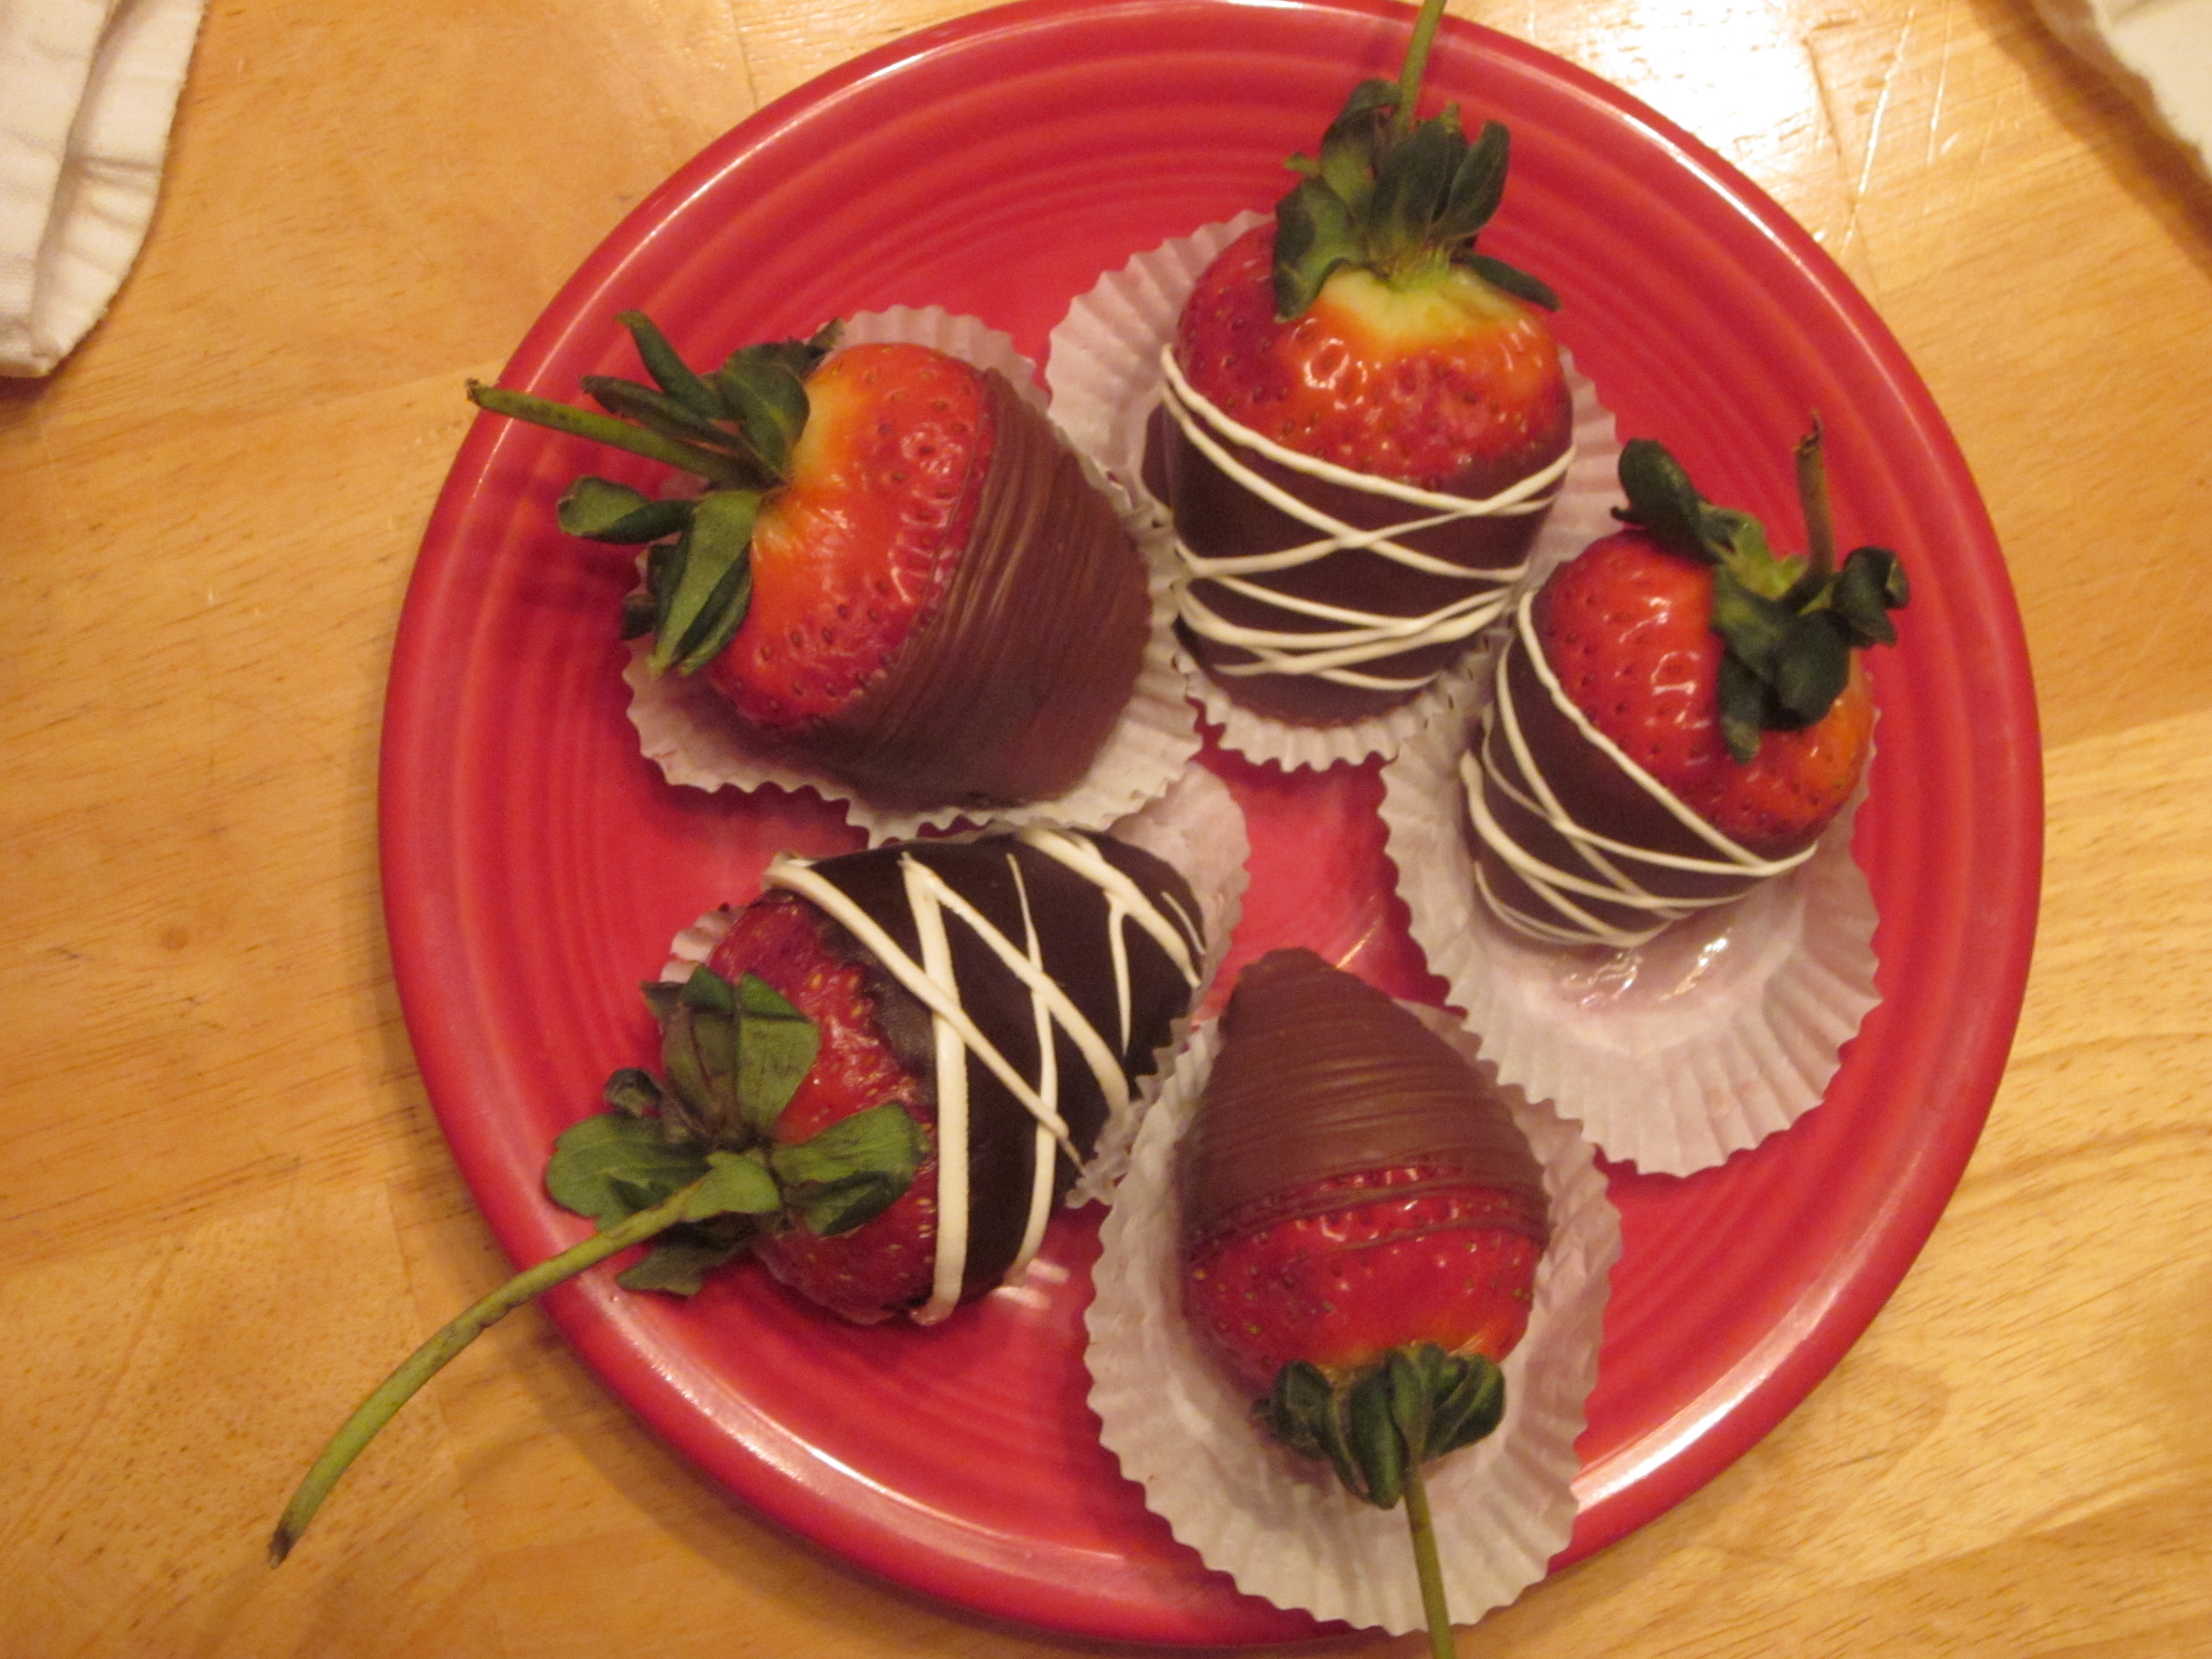 Chocolate-dipped Strawberries from Fedele's